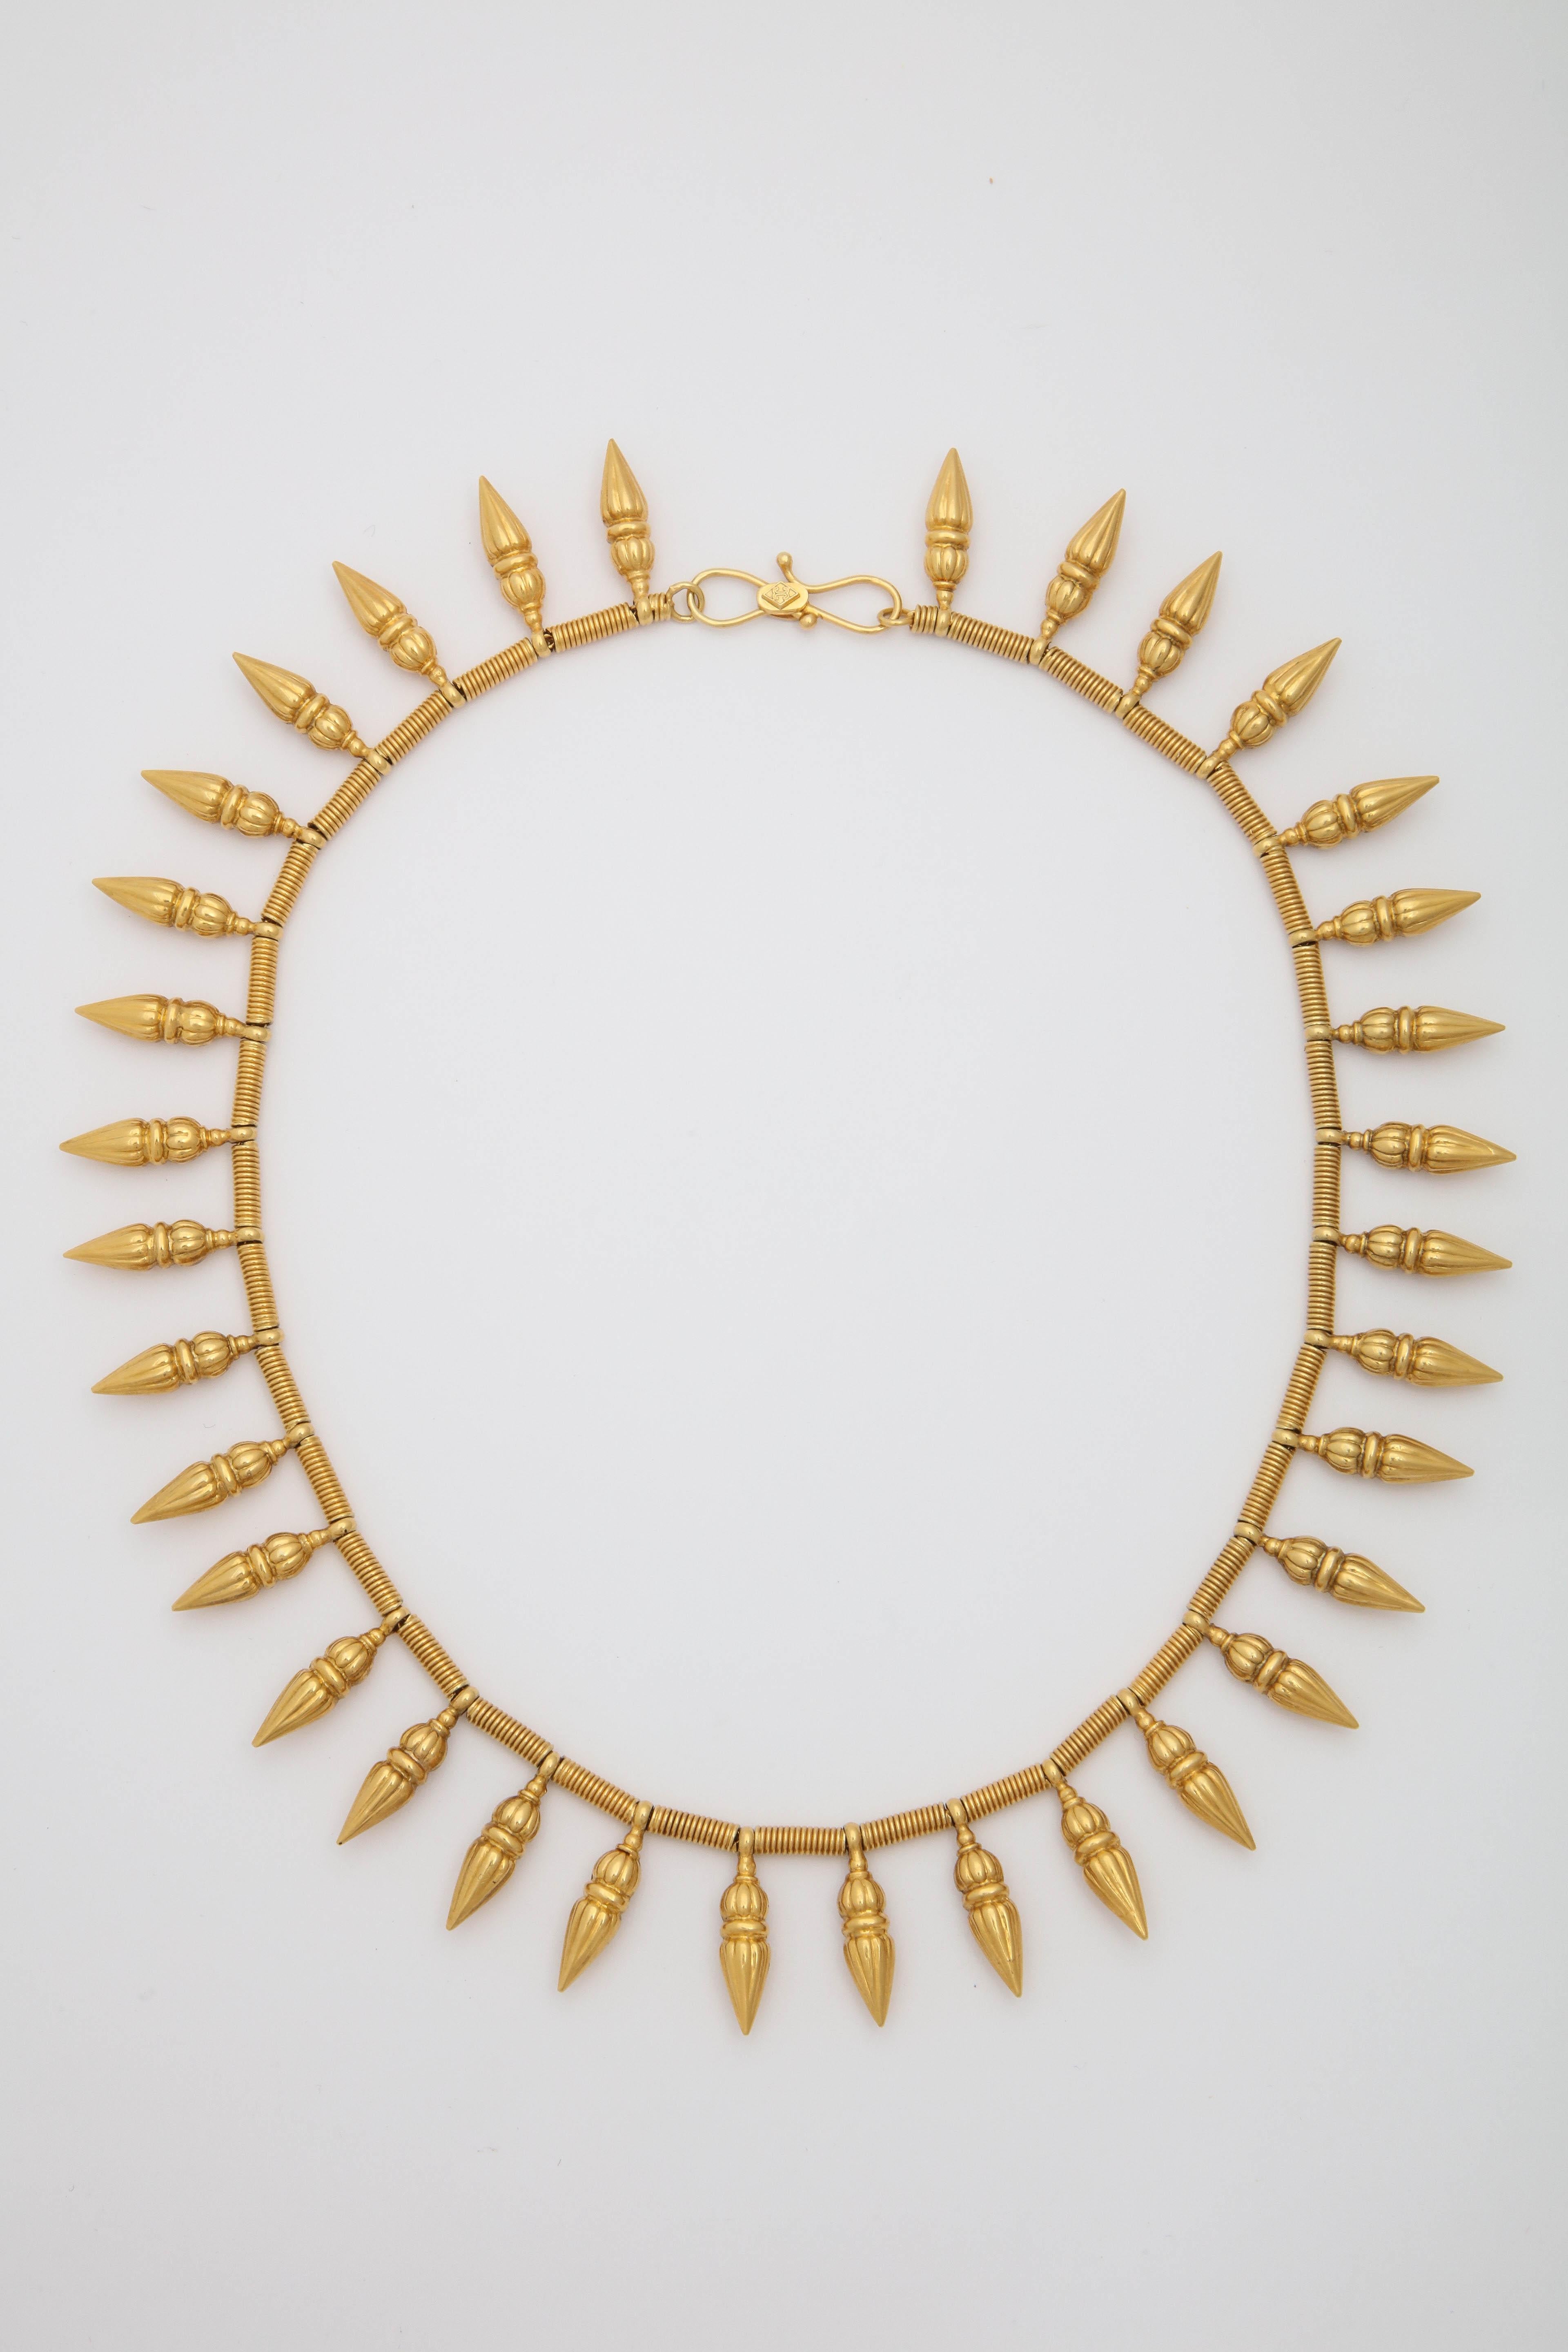 One Ladies 18kt Yellow Gold Cleopatra Style Necklace{ NOTE: } This Piece Tests To Be A Higher Karat Then 18kt Gold And Has A Very Rich Buttery Color Gold. Beautifully Made With Multiple Acorn Style Pattern Pendants To Illuminate A Beautiful Fringe